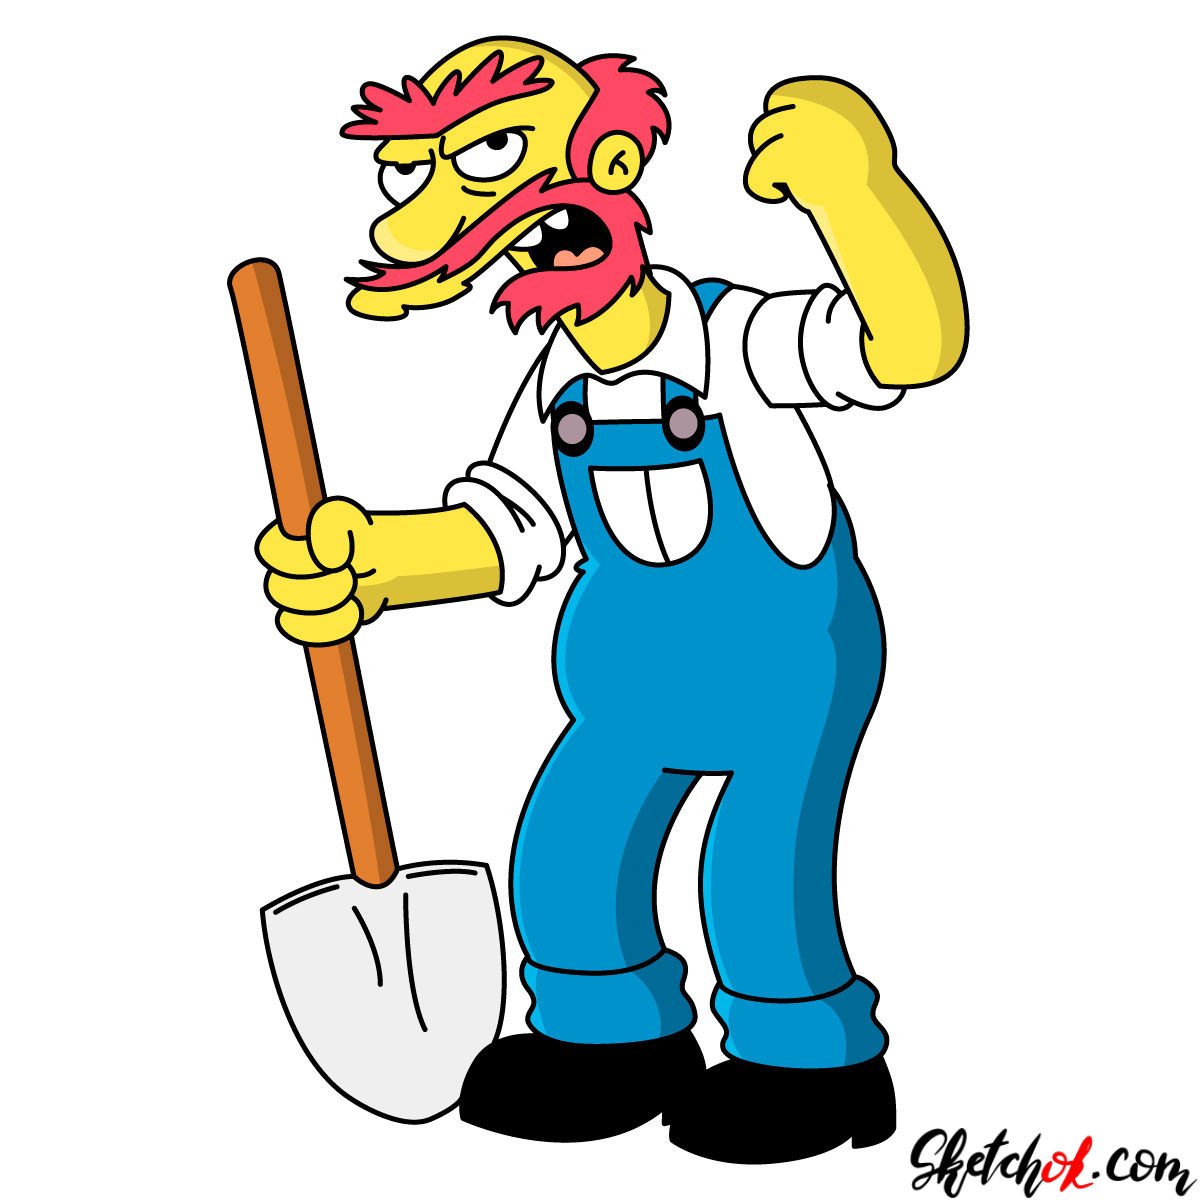 Groundskeeper Willie Archives - Sketchok easy drawing guides.